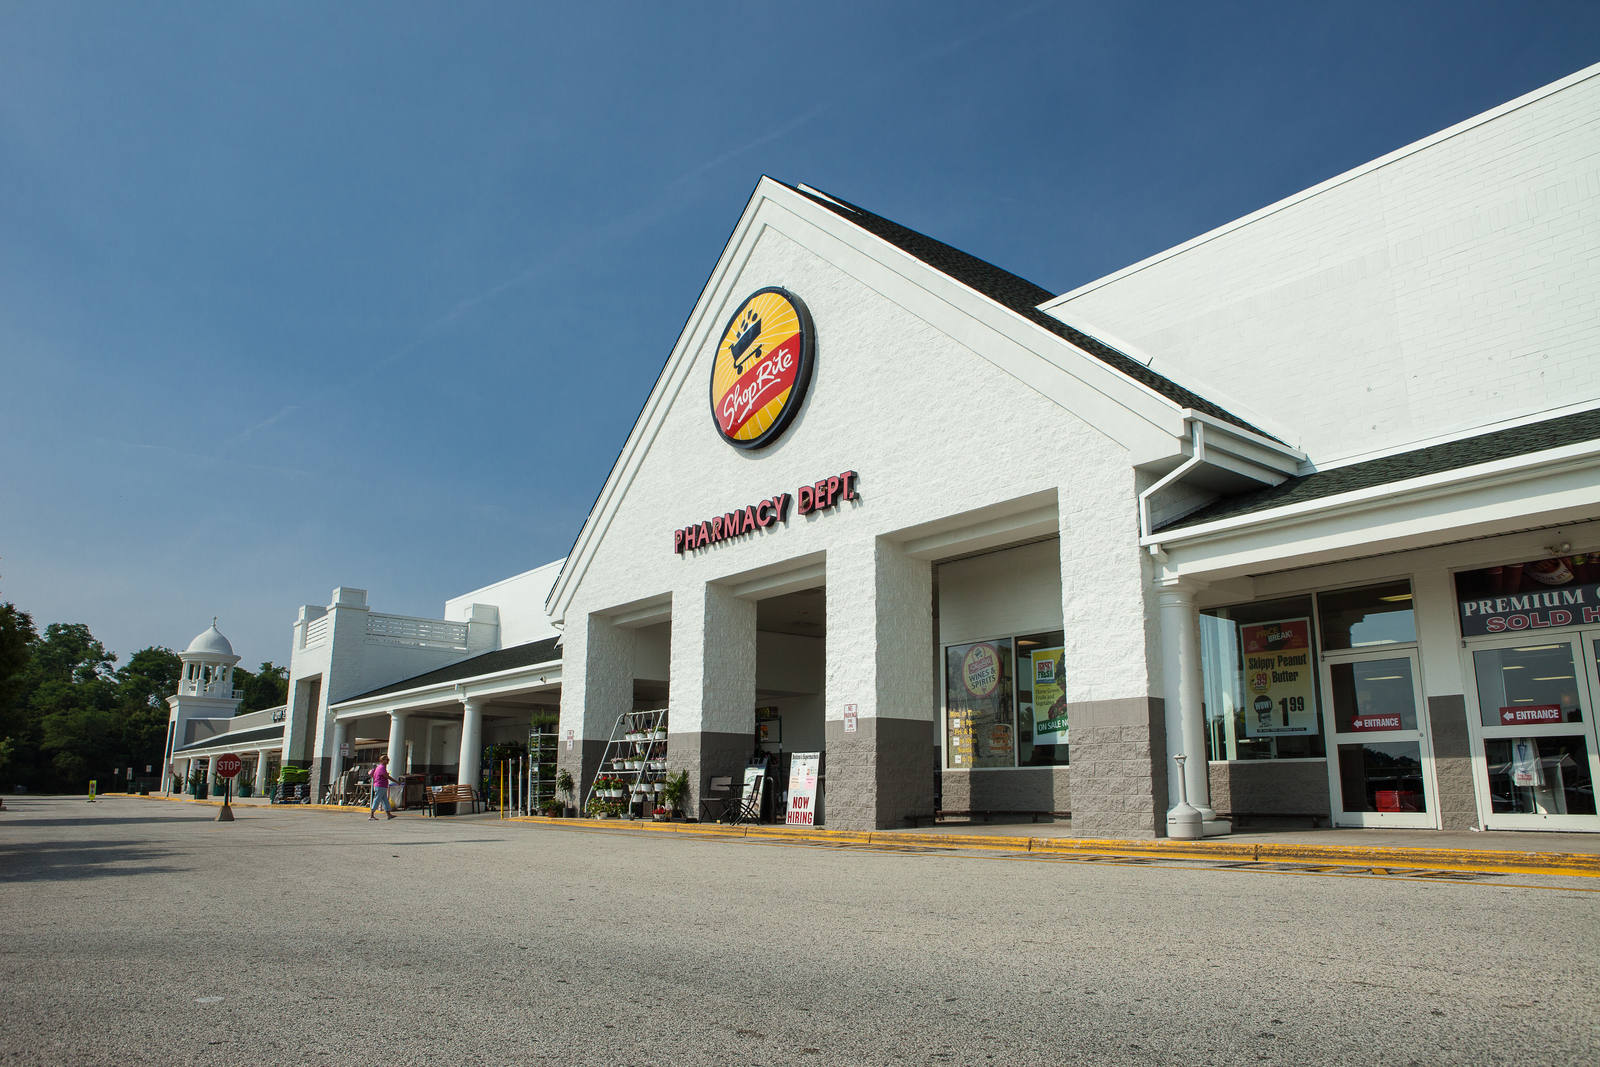 ShopRite, the dominant grocer in Southern New Jersey, has called Mill Pond Village its home for over 13 years.